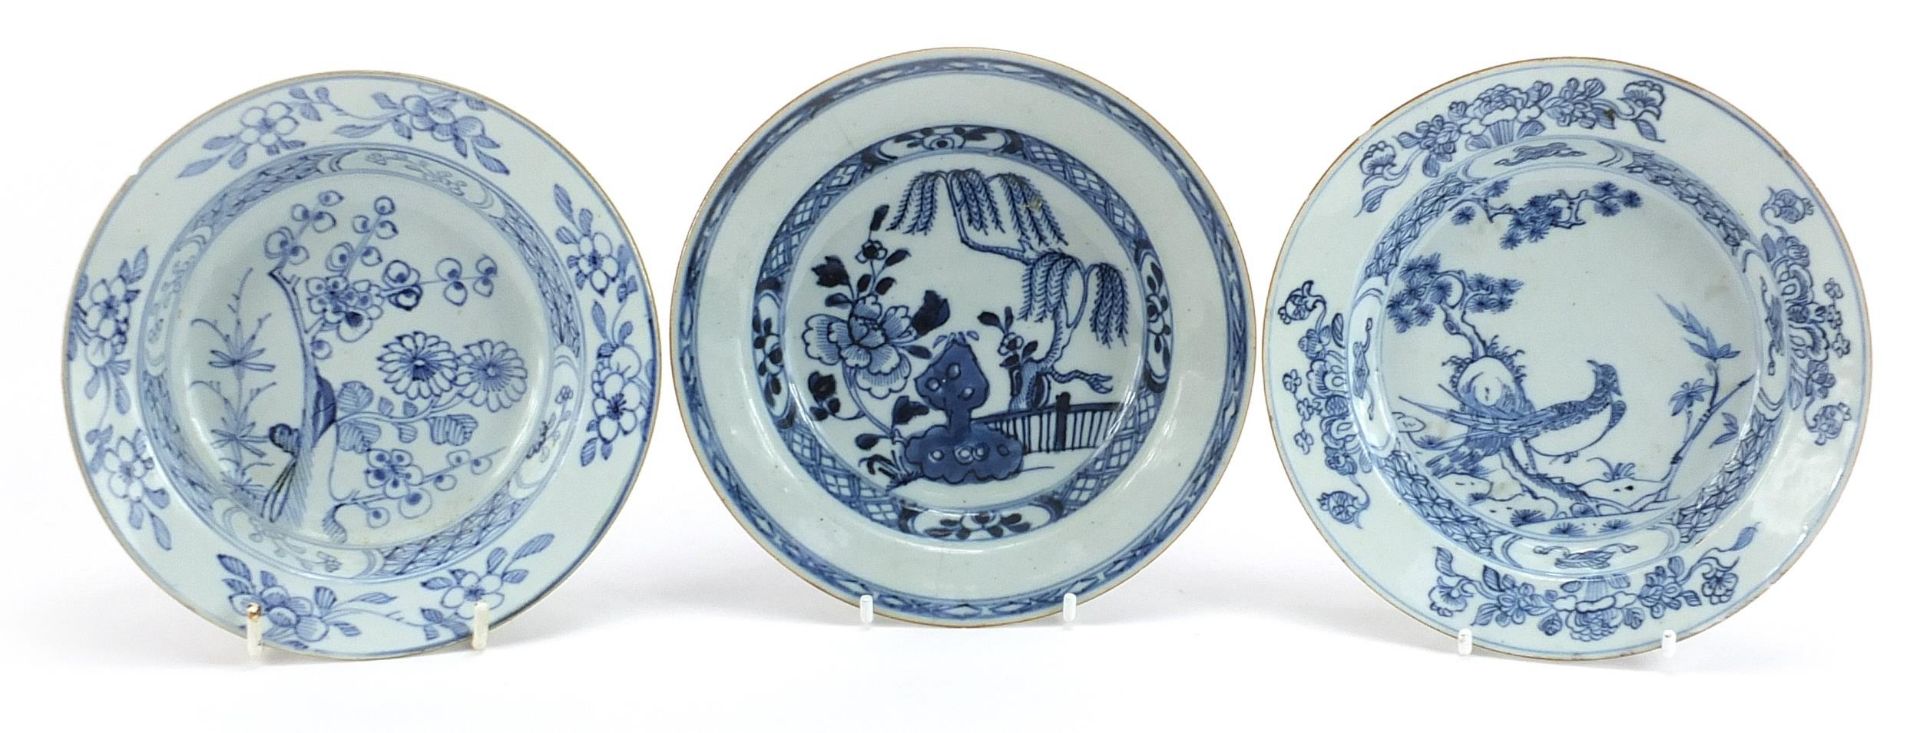 Three Chinese blue and white porcelain shallow bowls hand painted with flowers, each approximately